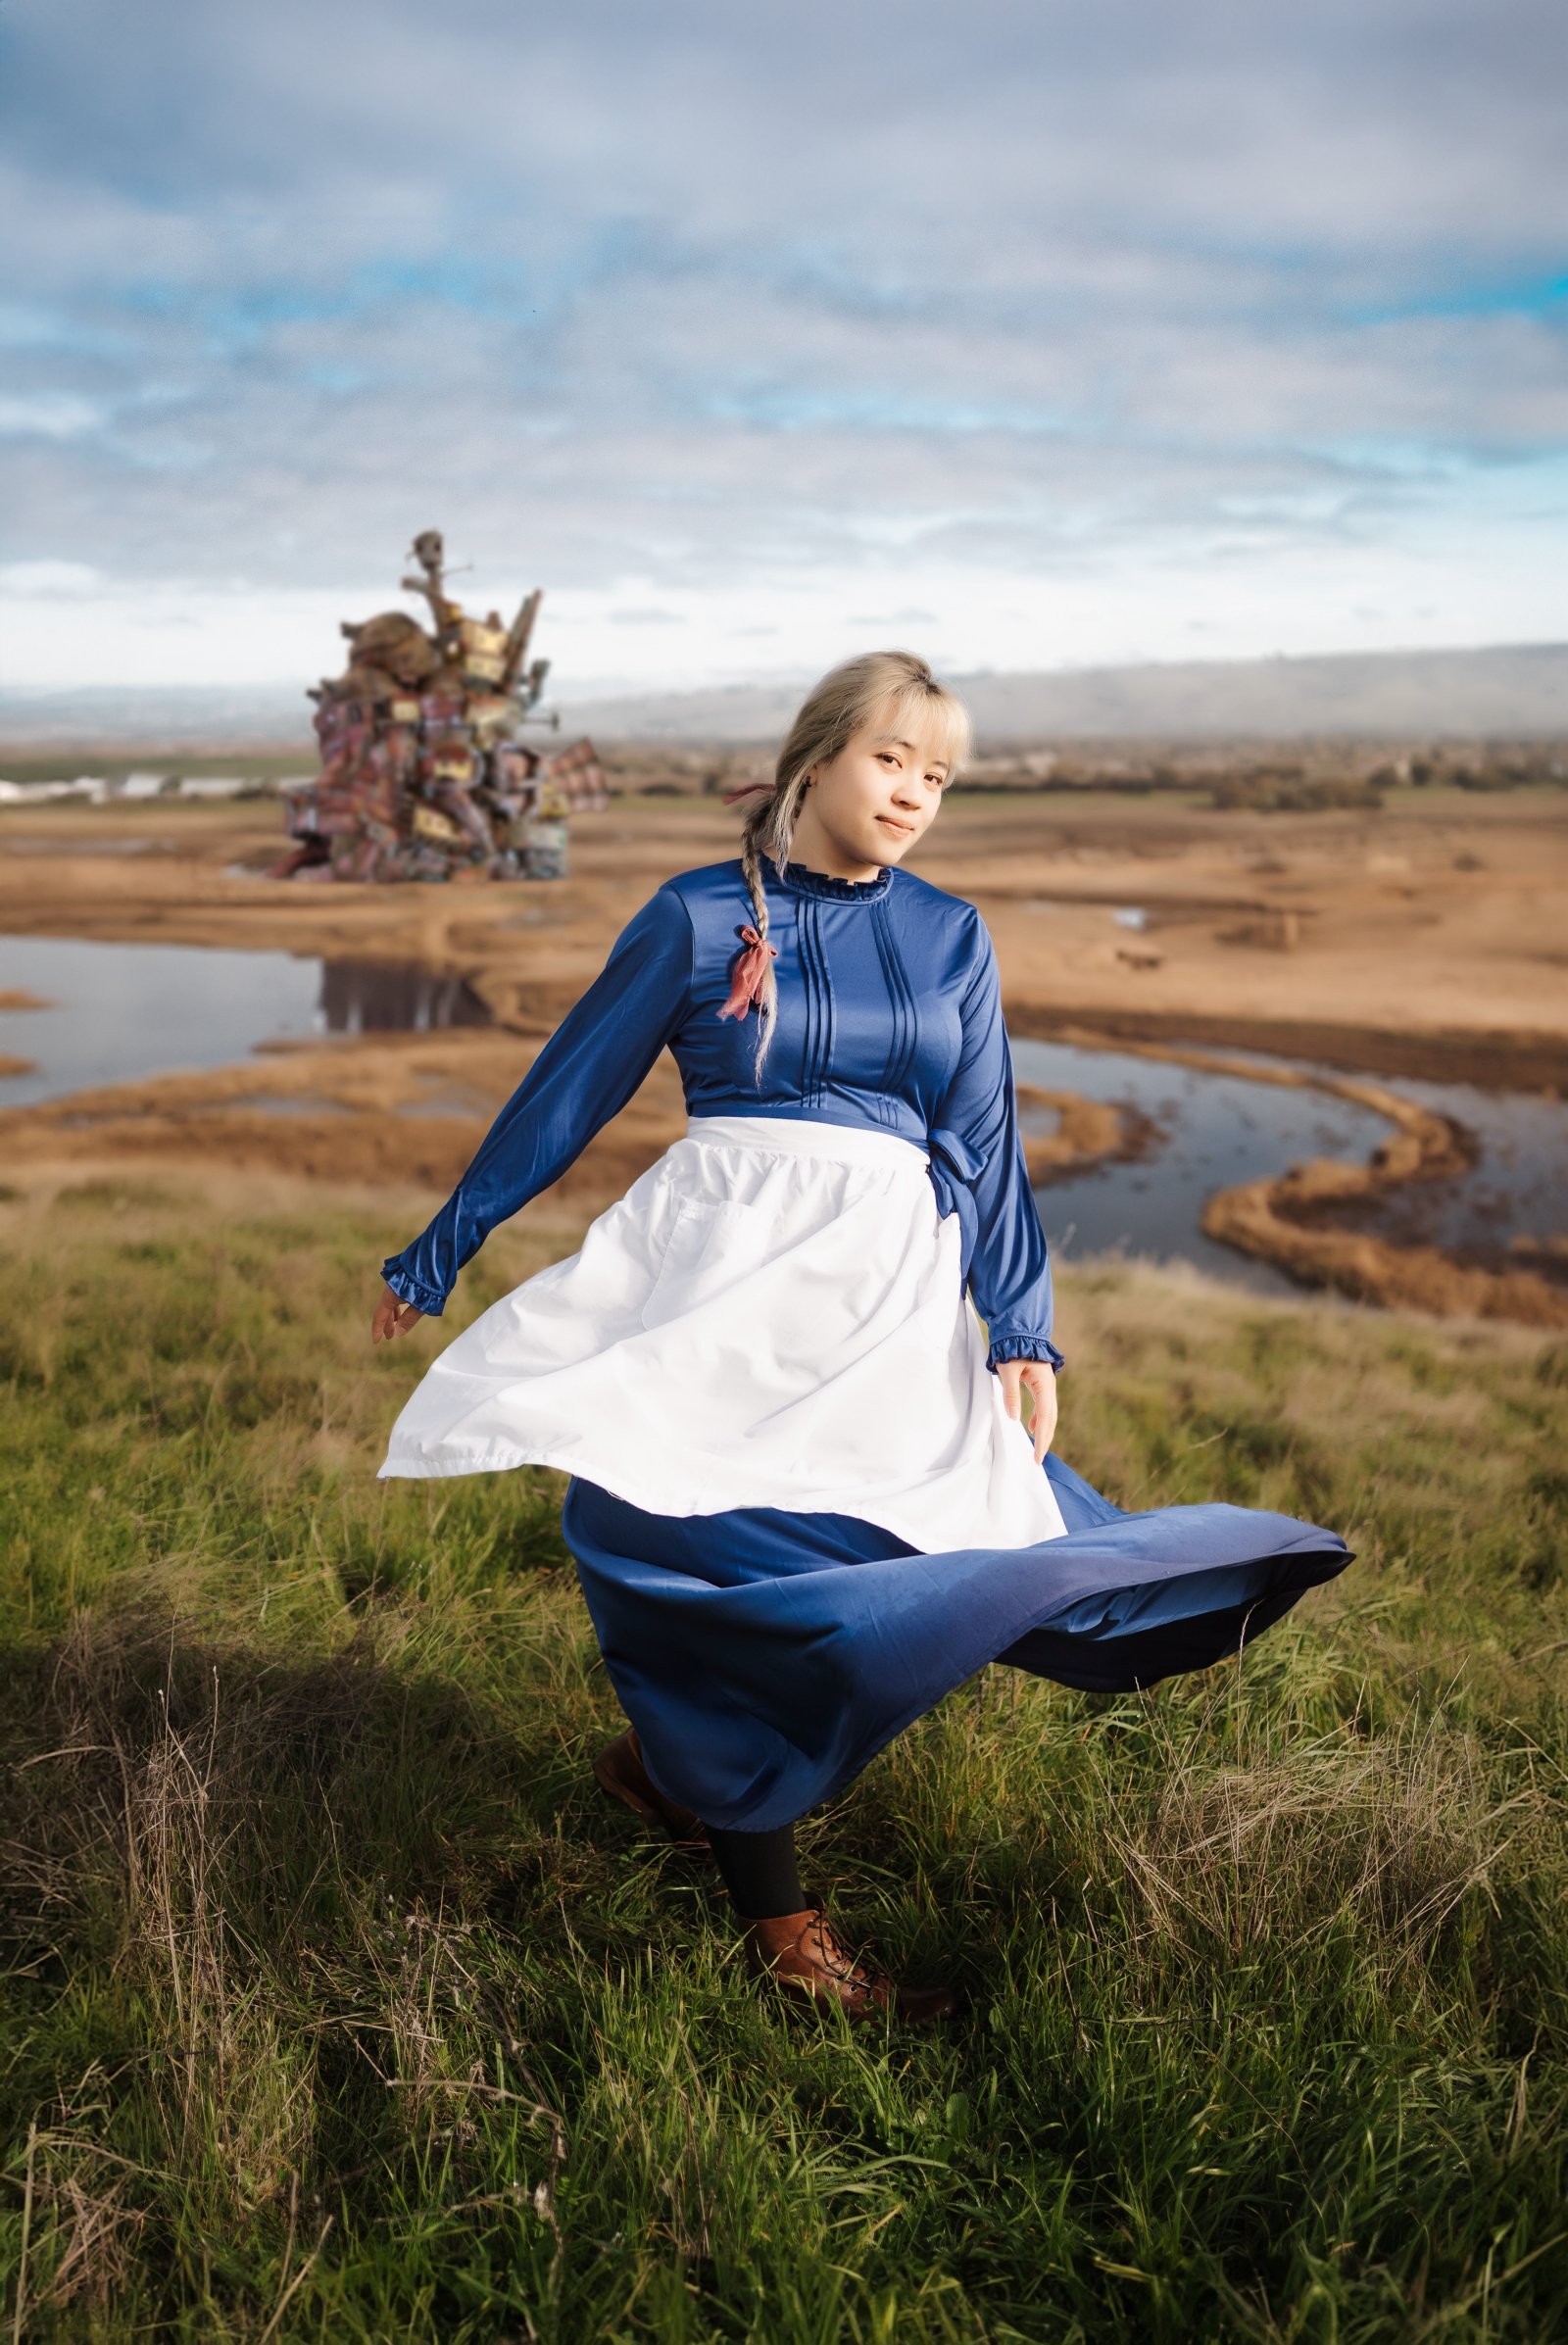 howl's moving castle sophie cosplay photoshoot bay area cosplay photographer 4.jpg